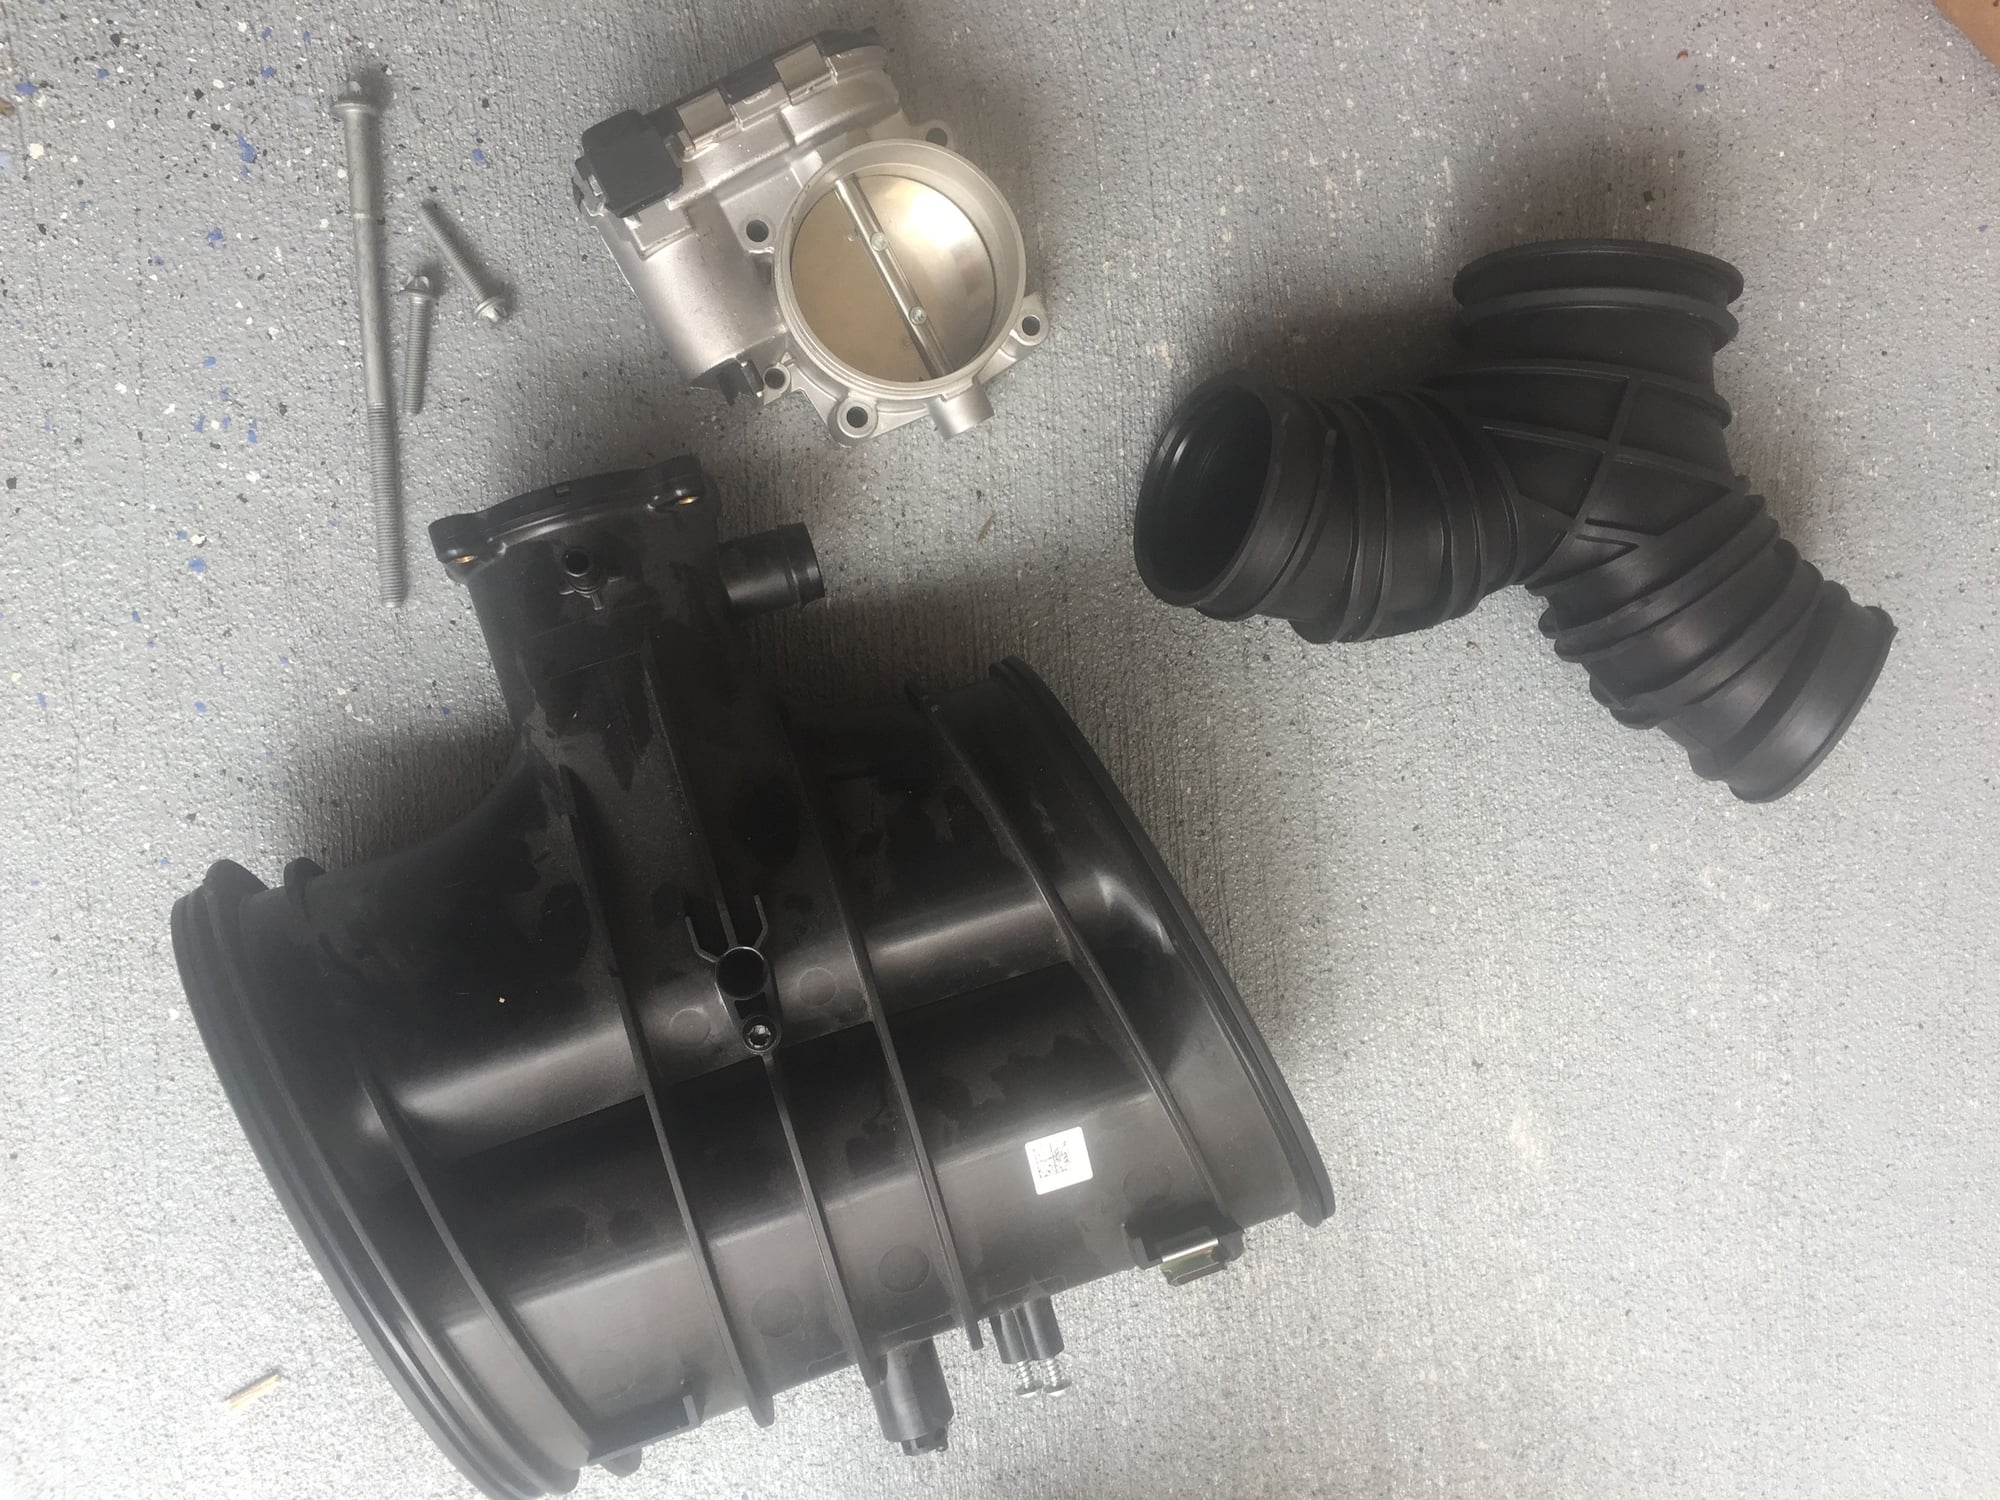 Engine - Intake/Fuel - GT4 OEM Intake Plenum and Throttle Body - Used - 2016 Porsche Cayman GT4 - New York, NY 10177, United States